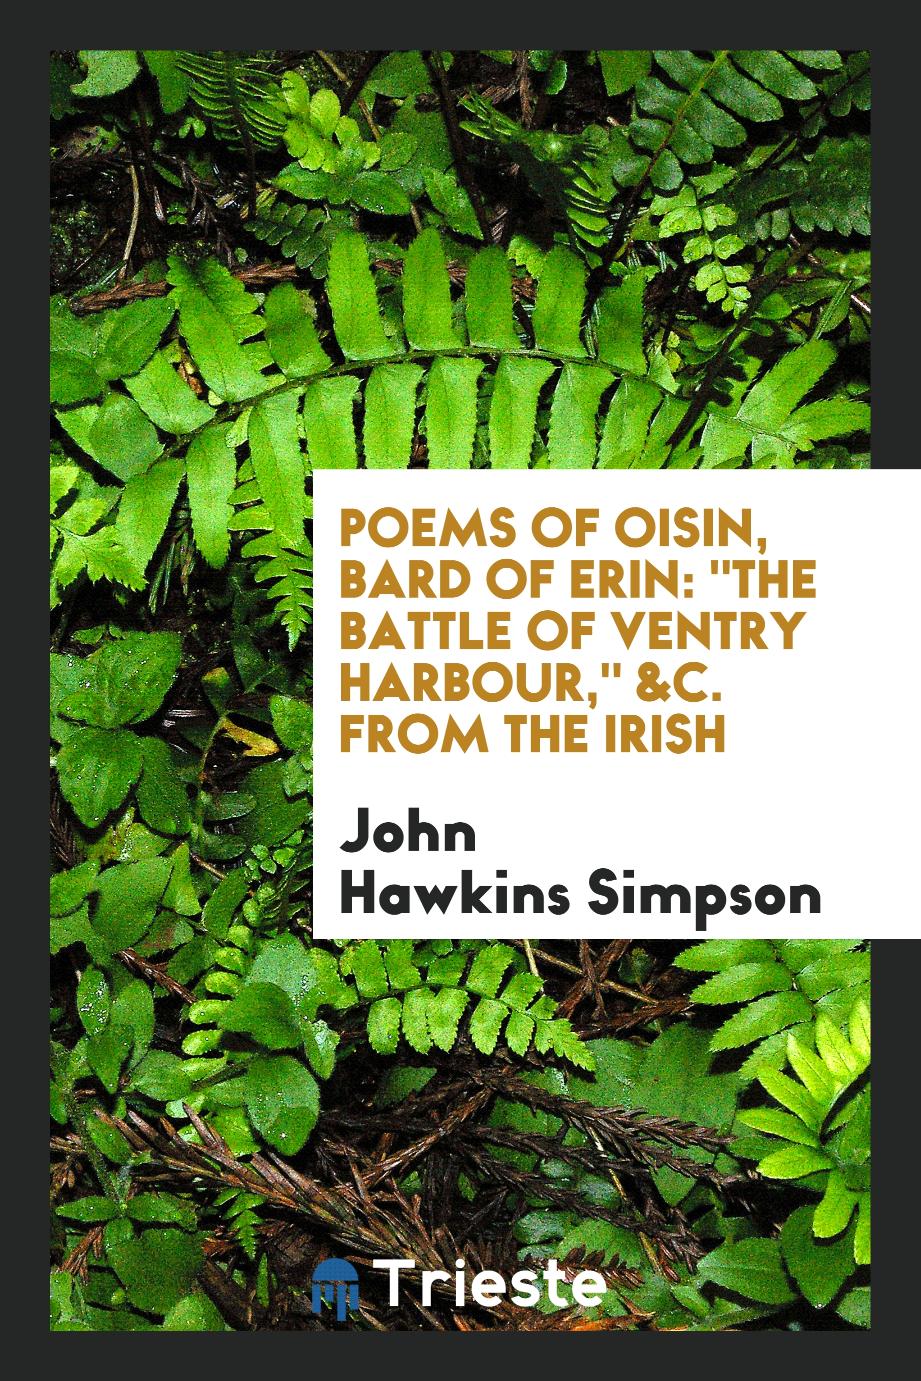 Poems of Oisin, Bard of Erin: "The Battle of Ventry Harbour," &C. From the Irish